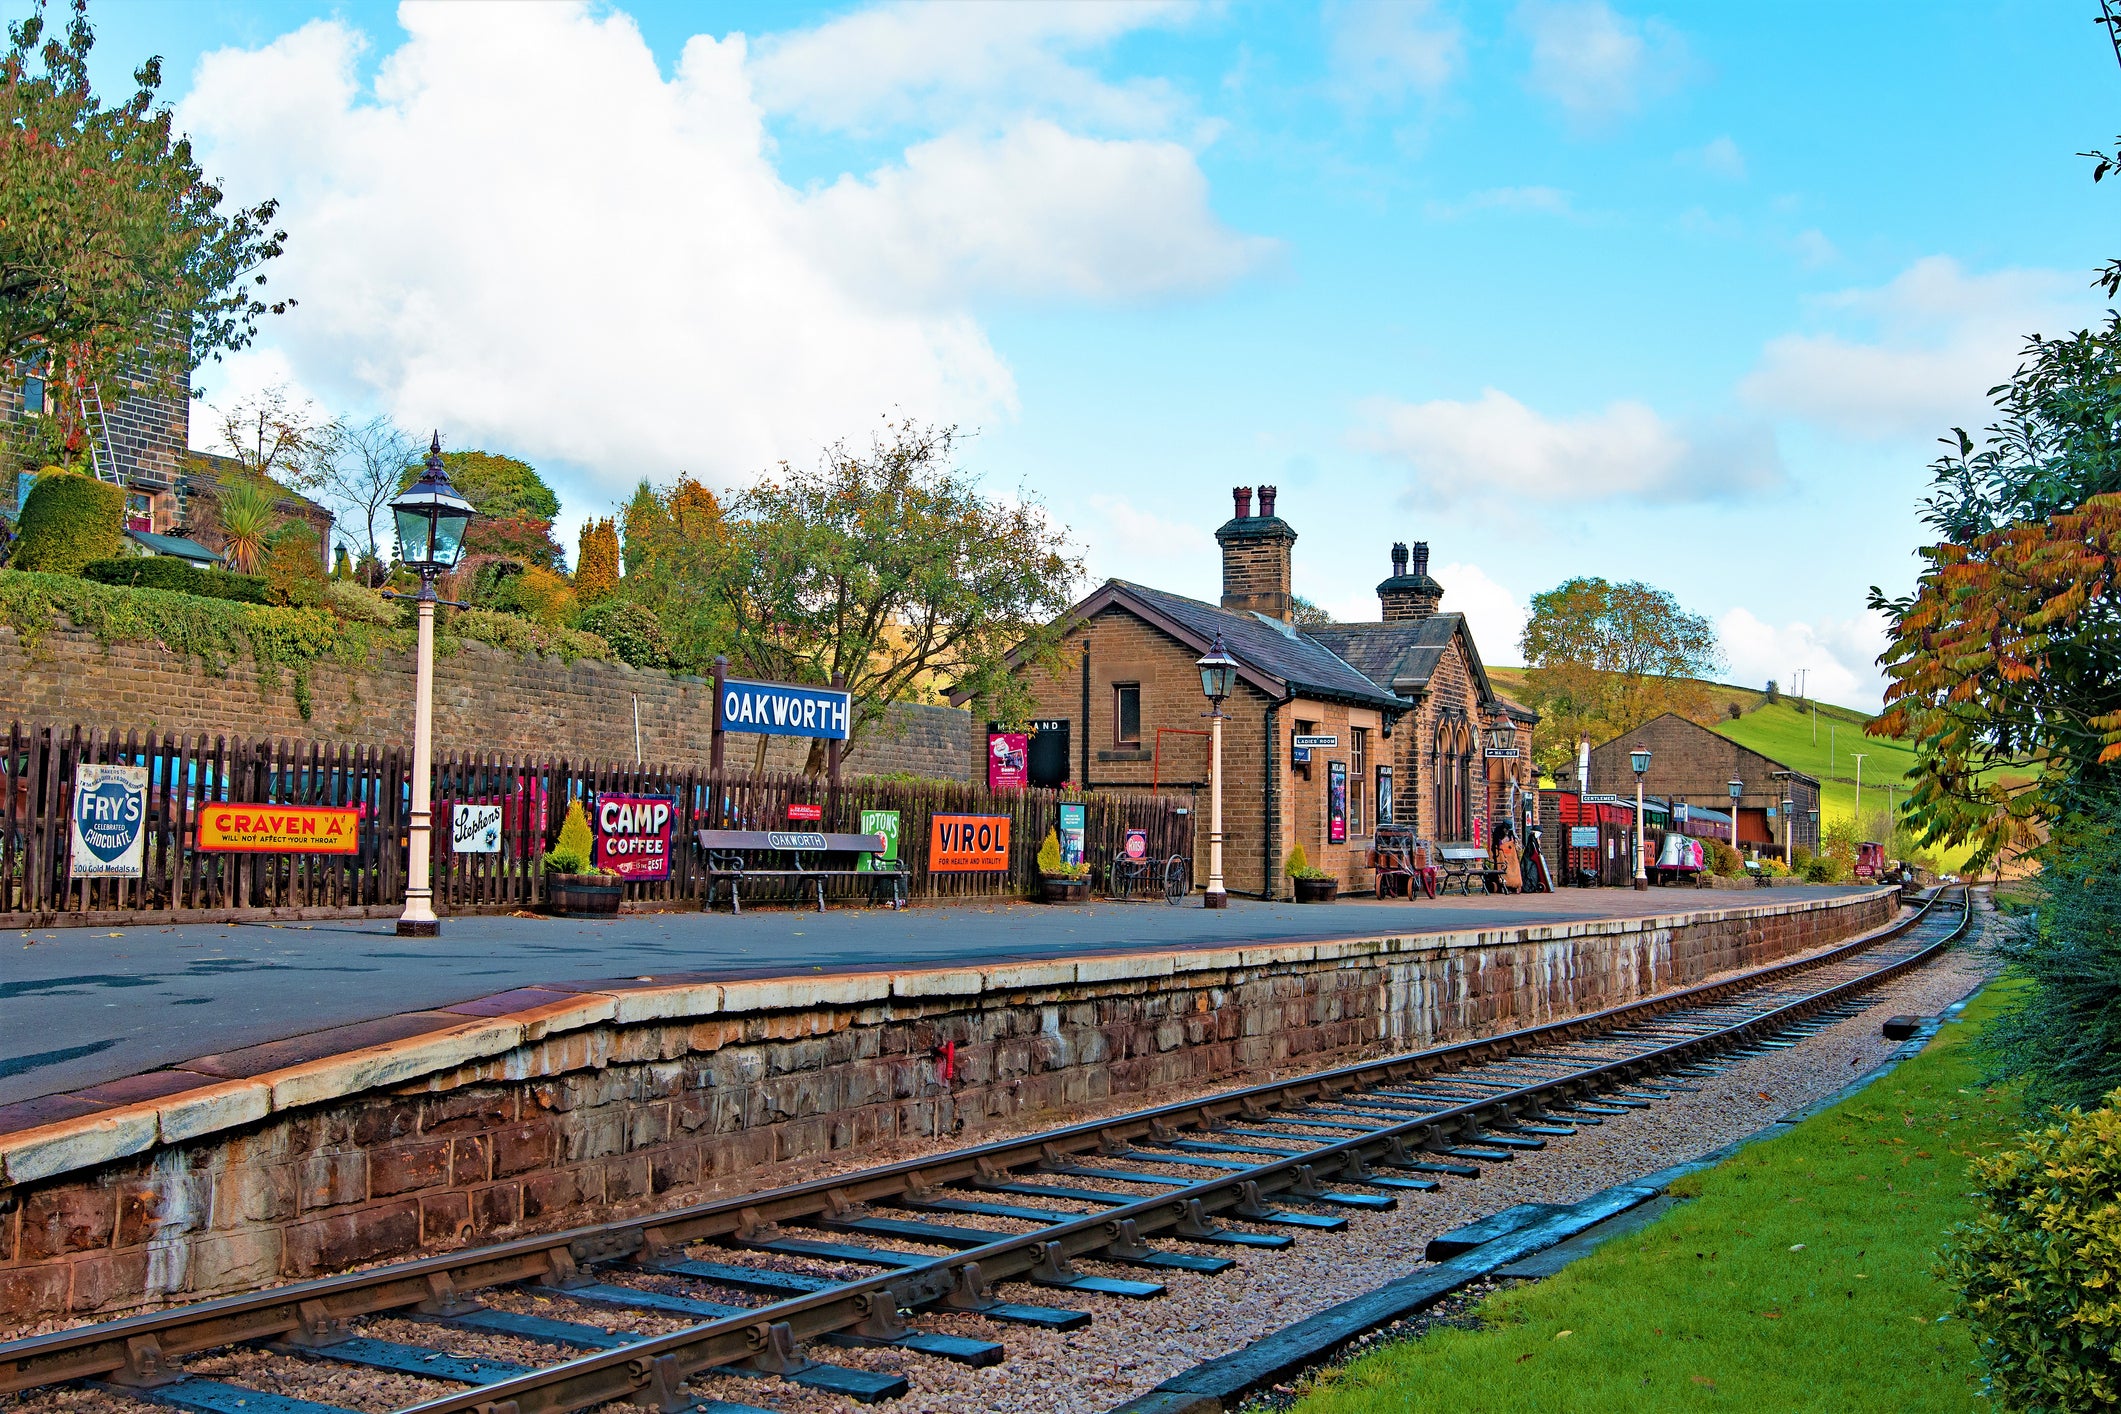 Oakworth station on the Keighly & Worth valley railway route